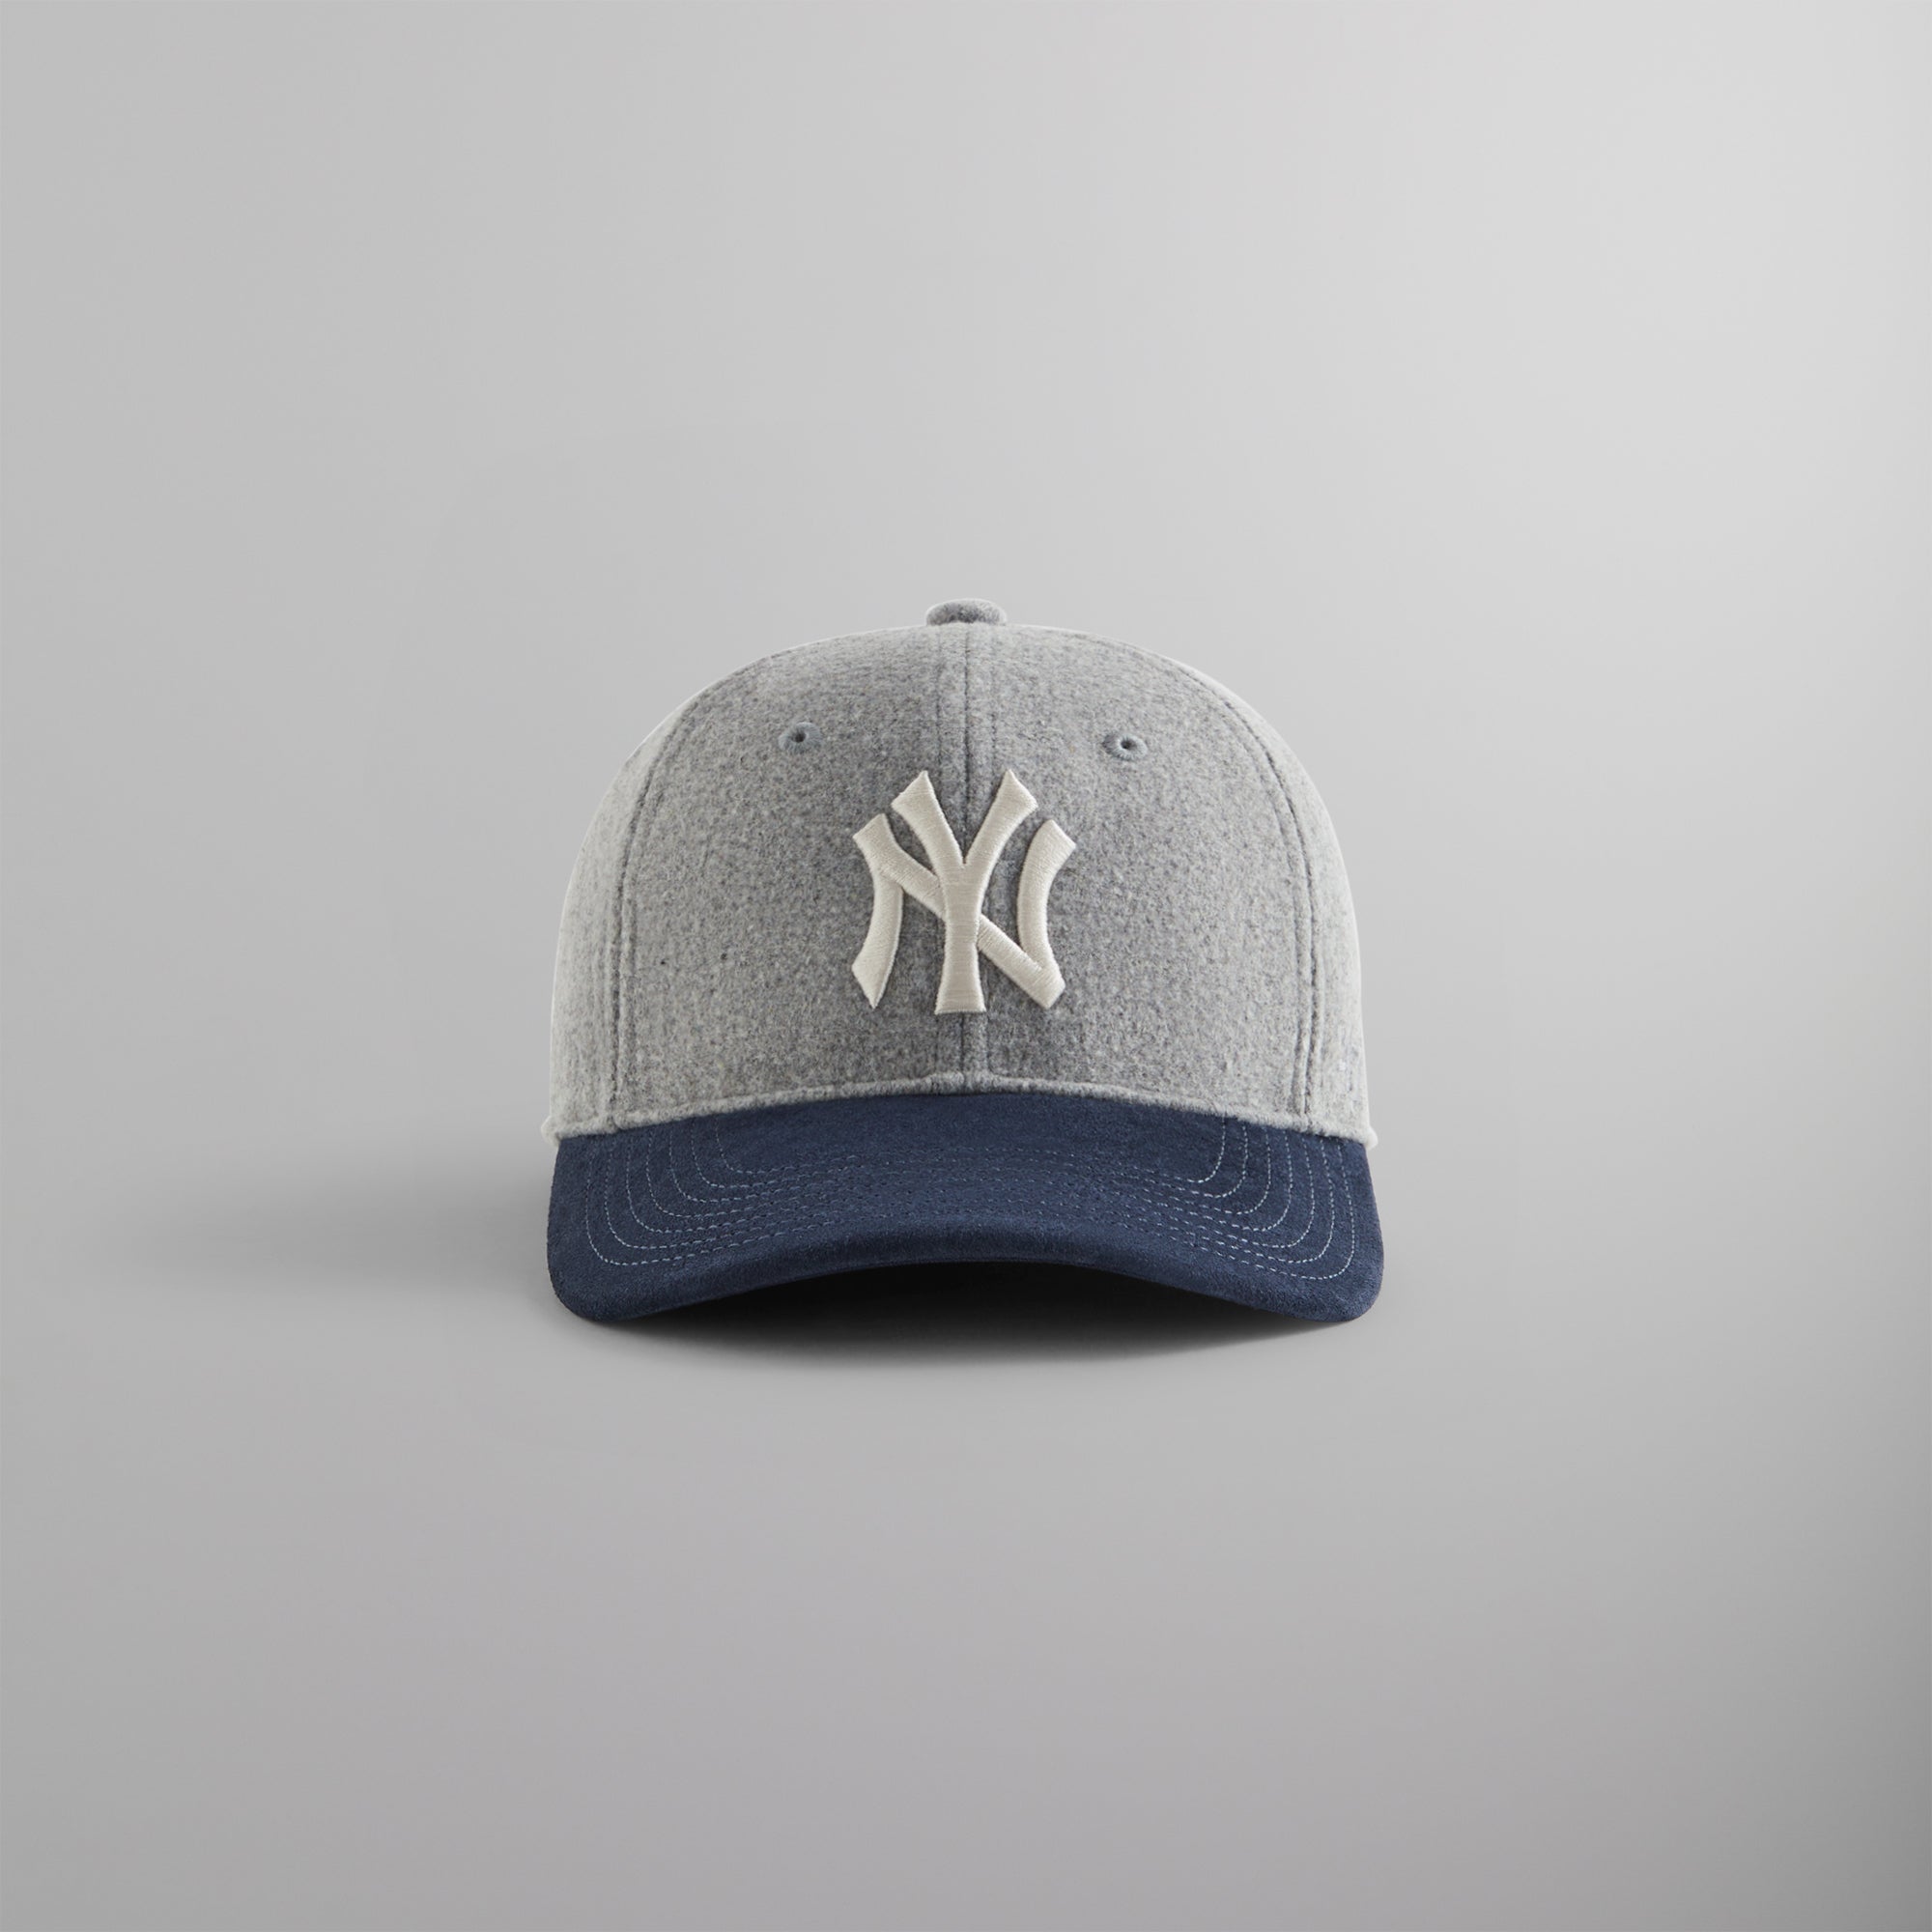 Kith & '47 for New York Yankees Unstructured Wool Fitted